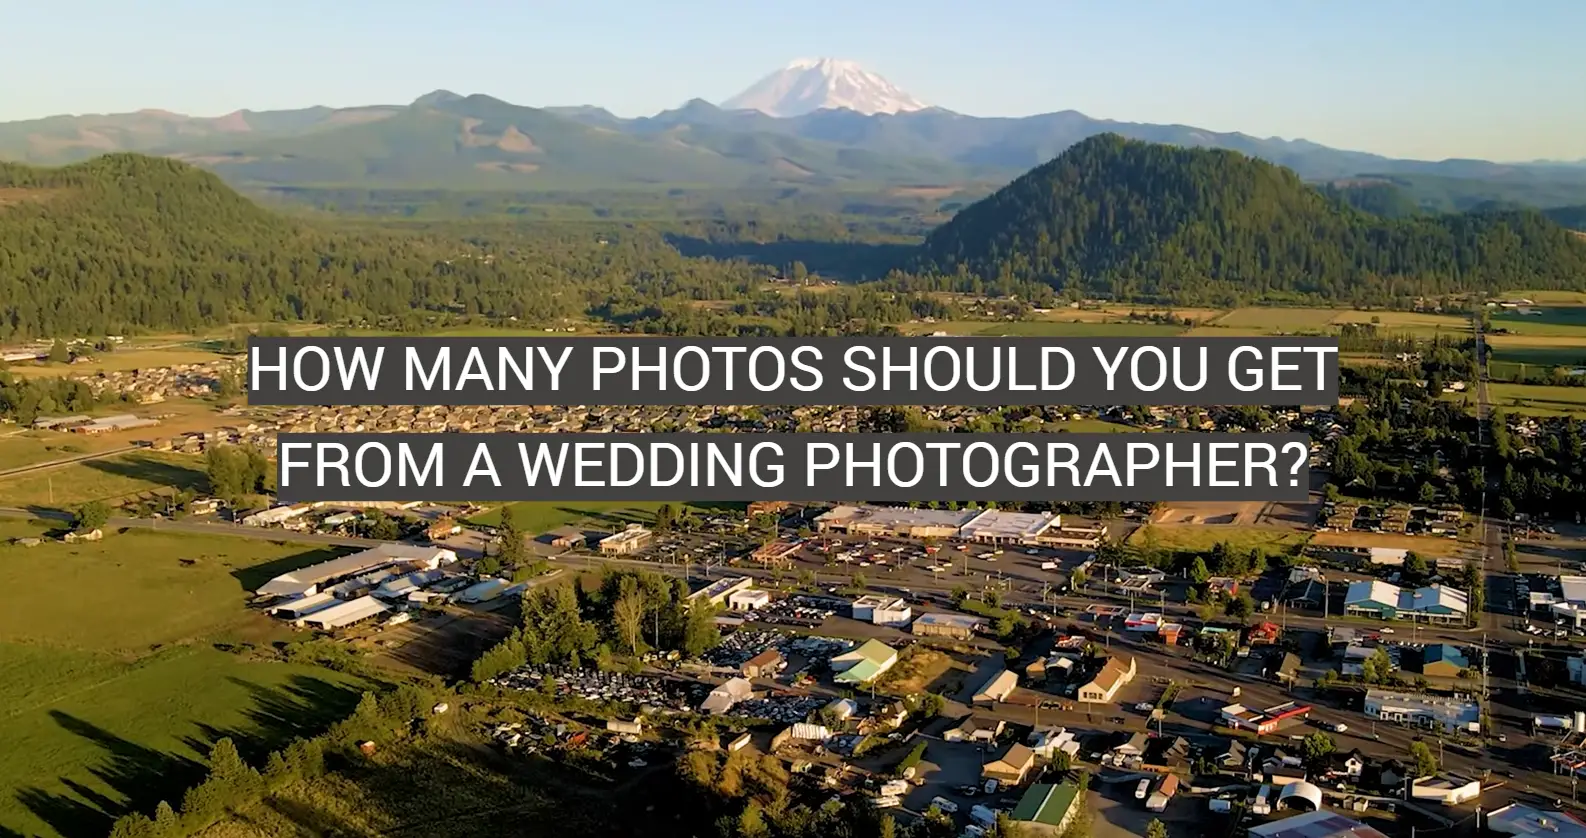 How Many Photos Should You Get From a Wedding Photographer?